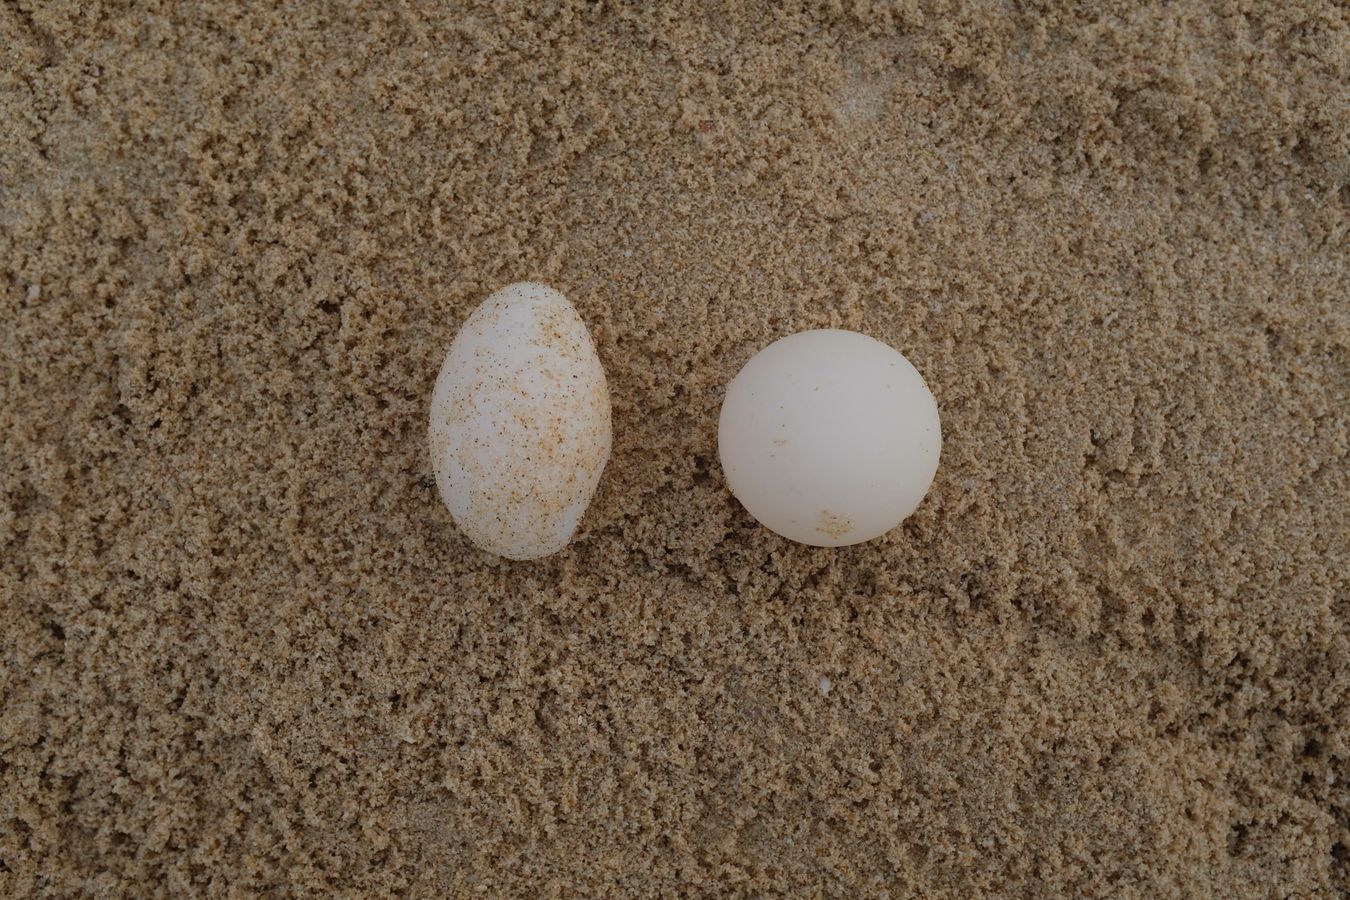 Normal egg and oval egg of green turtle.